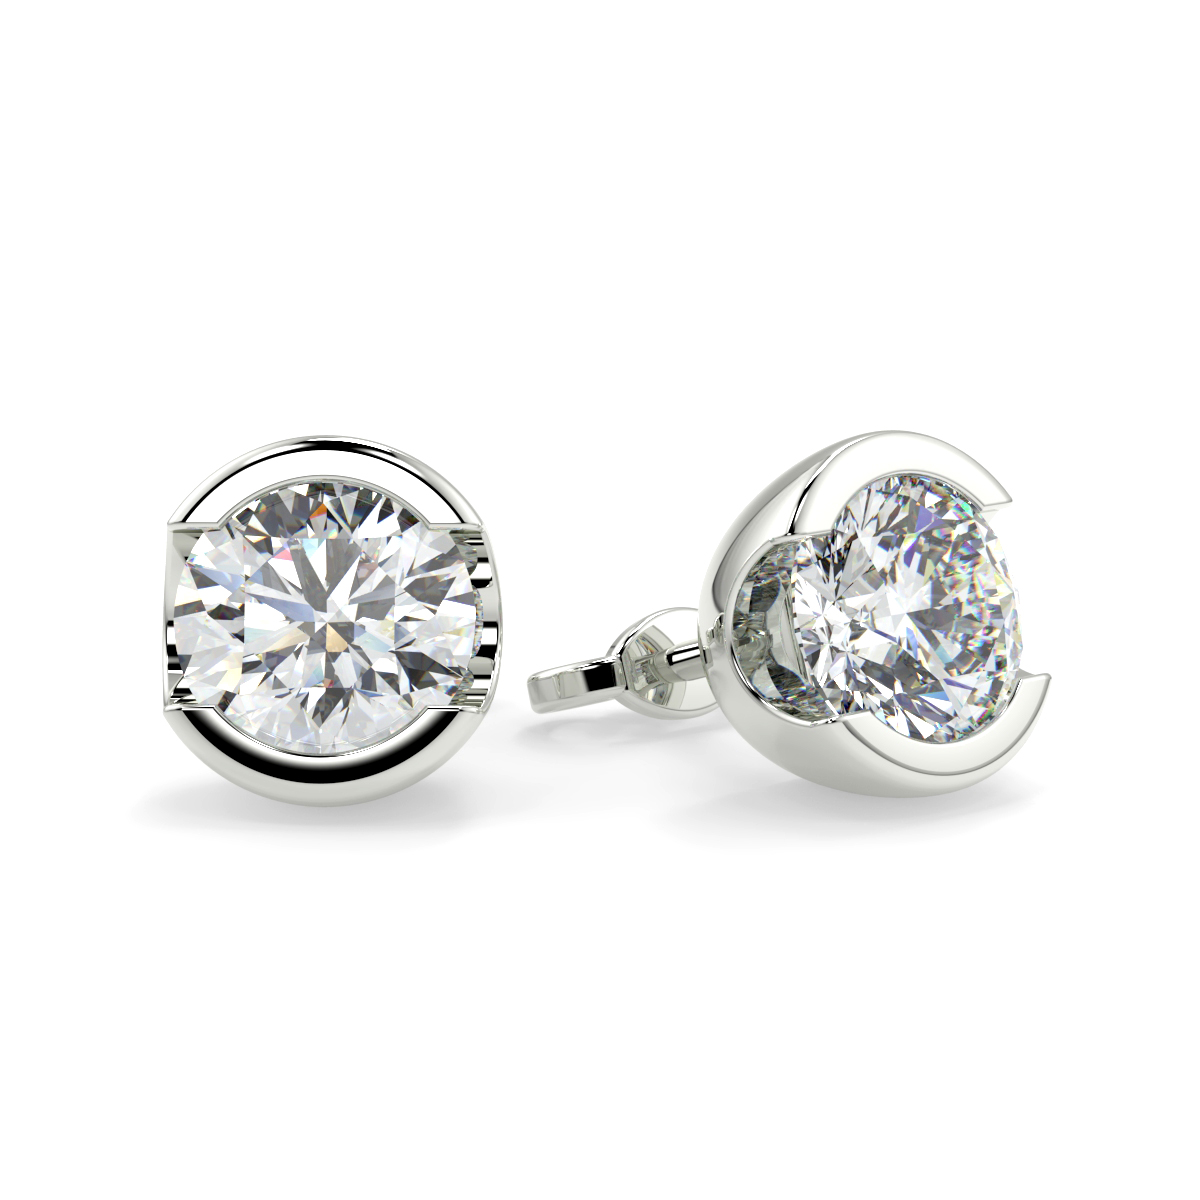 Explore Our Latest Collection of Solitaire Earrings, CANARY WHARF, London, United Kingdom